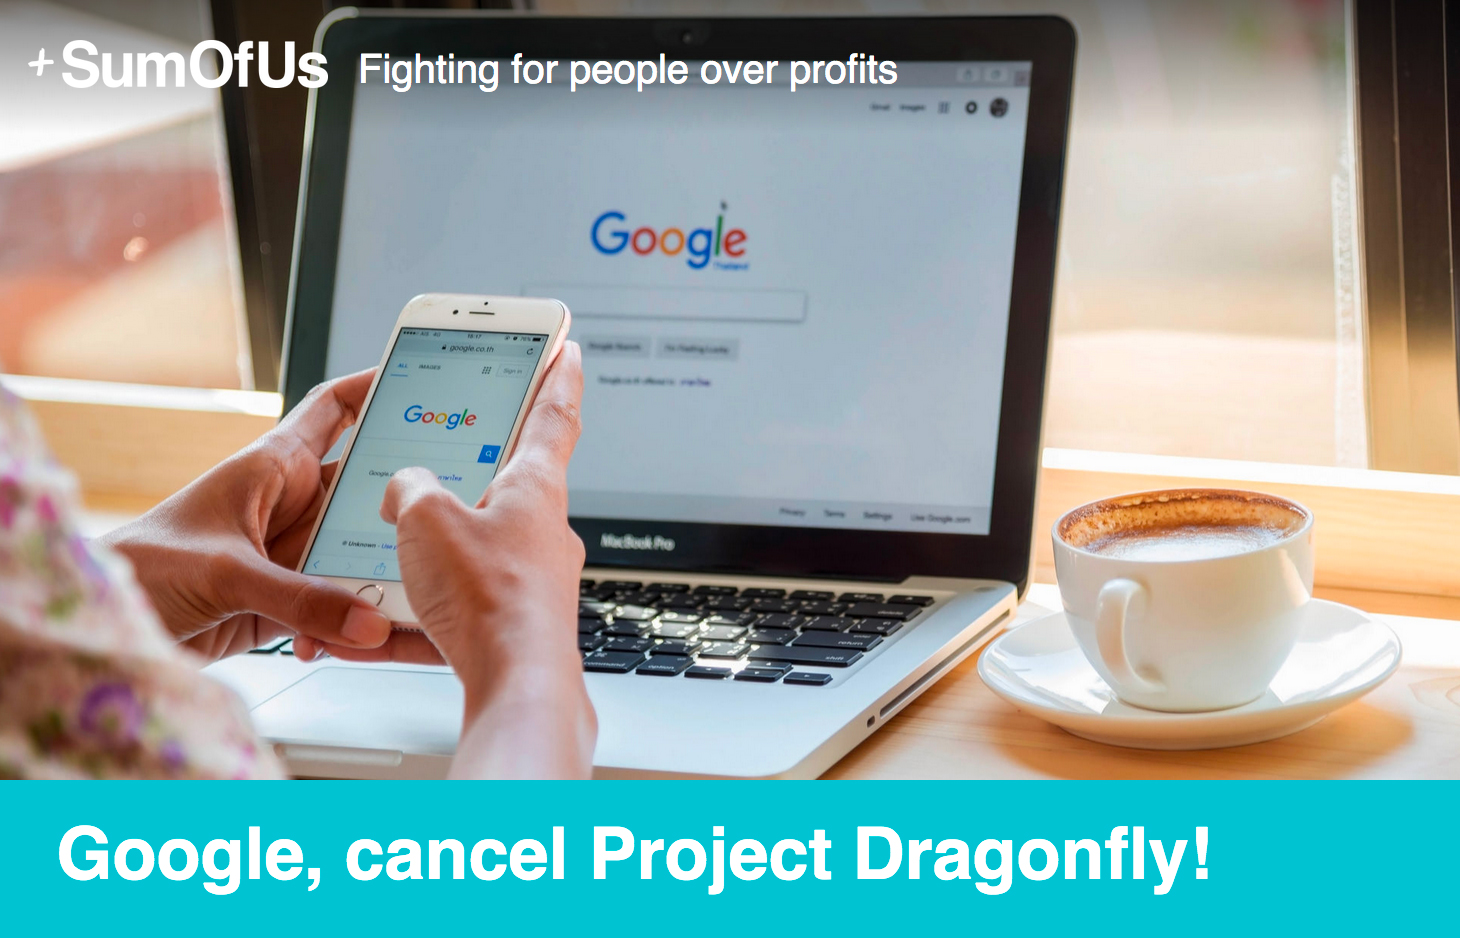 Almost 50,000 people join Tibet groups and corporate campaigners in demanding Google immediately drop “Project Dragonfly’, the censored China search engine